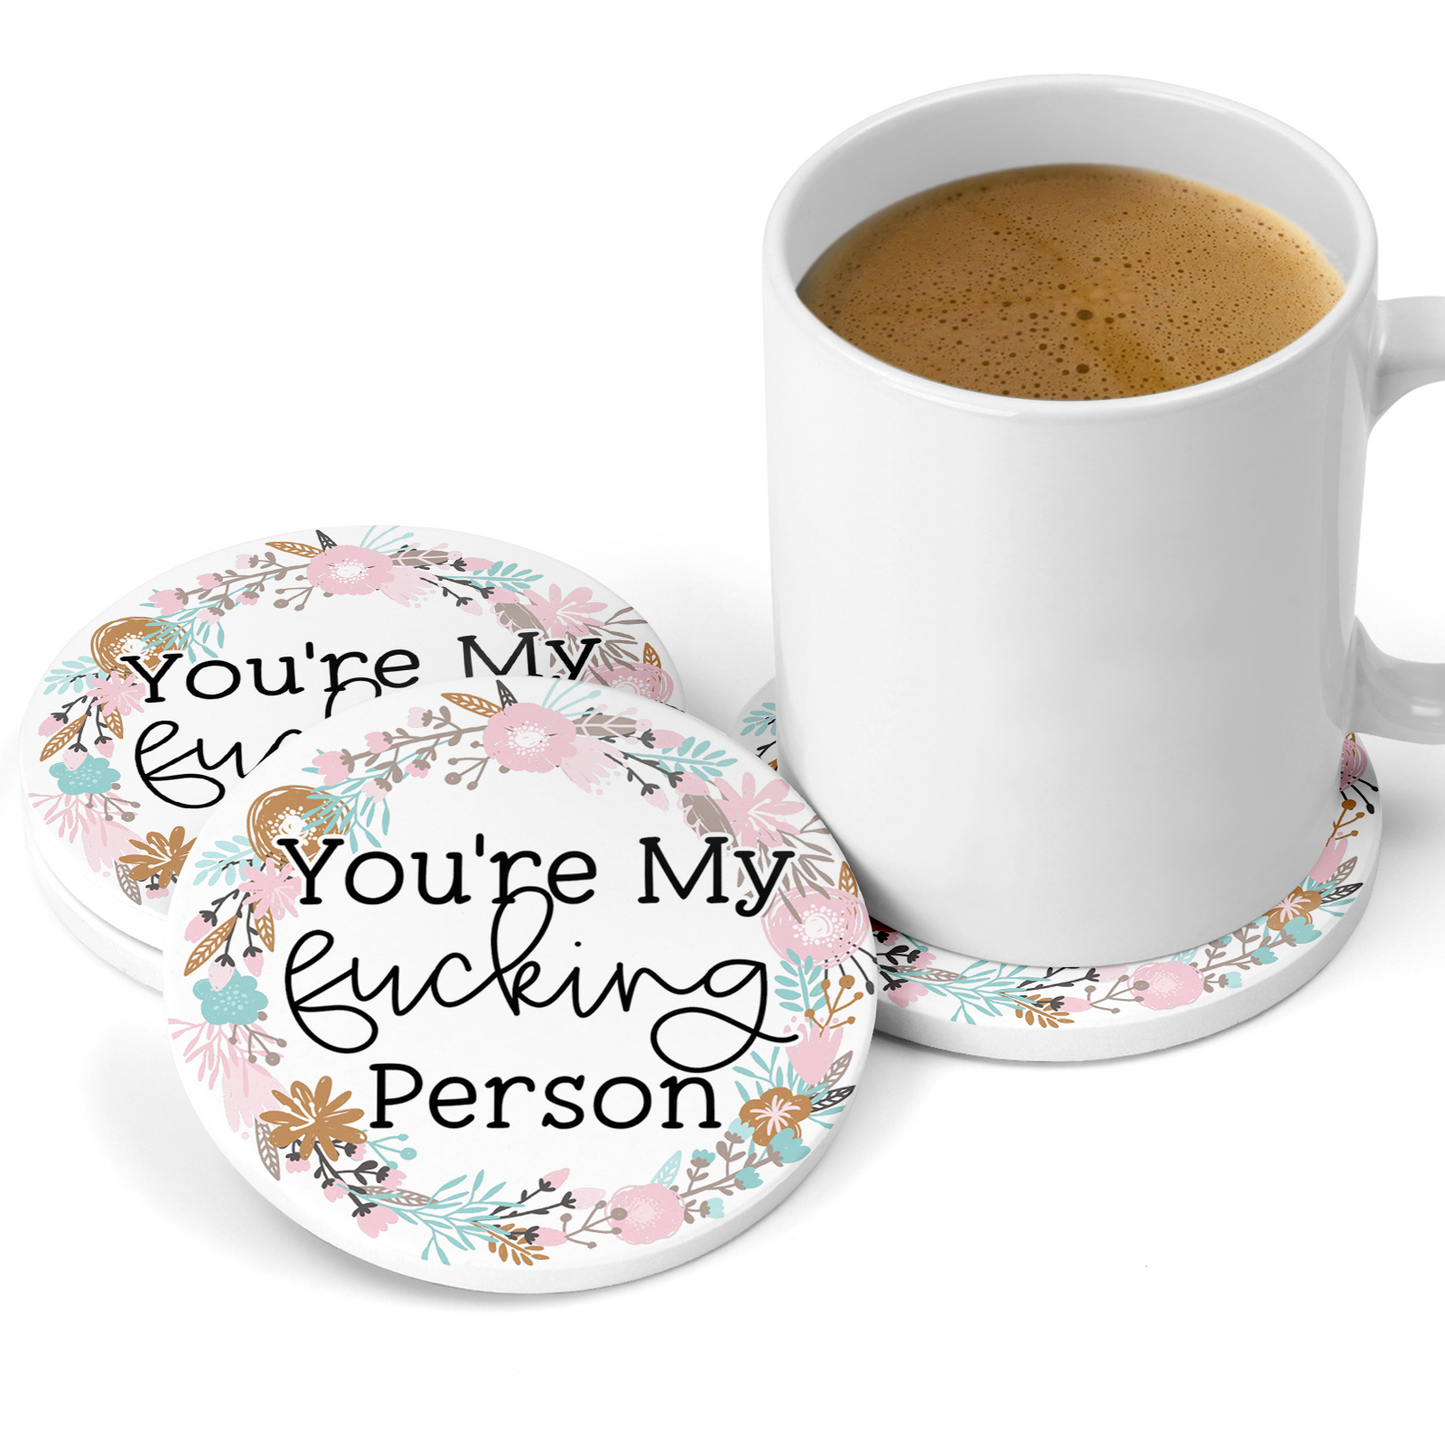 You're My Fucking Person Sandstone Coaster Set